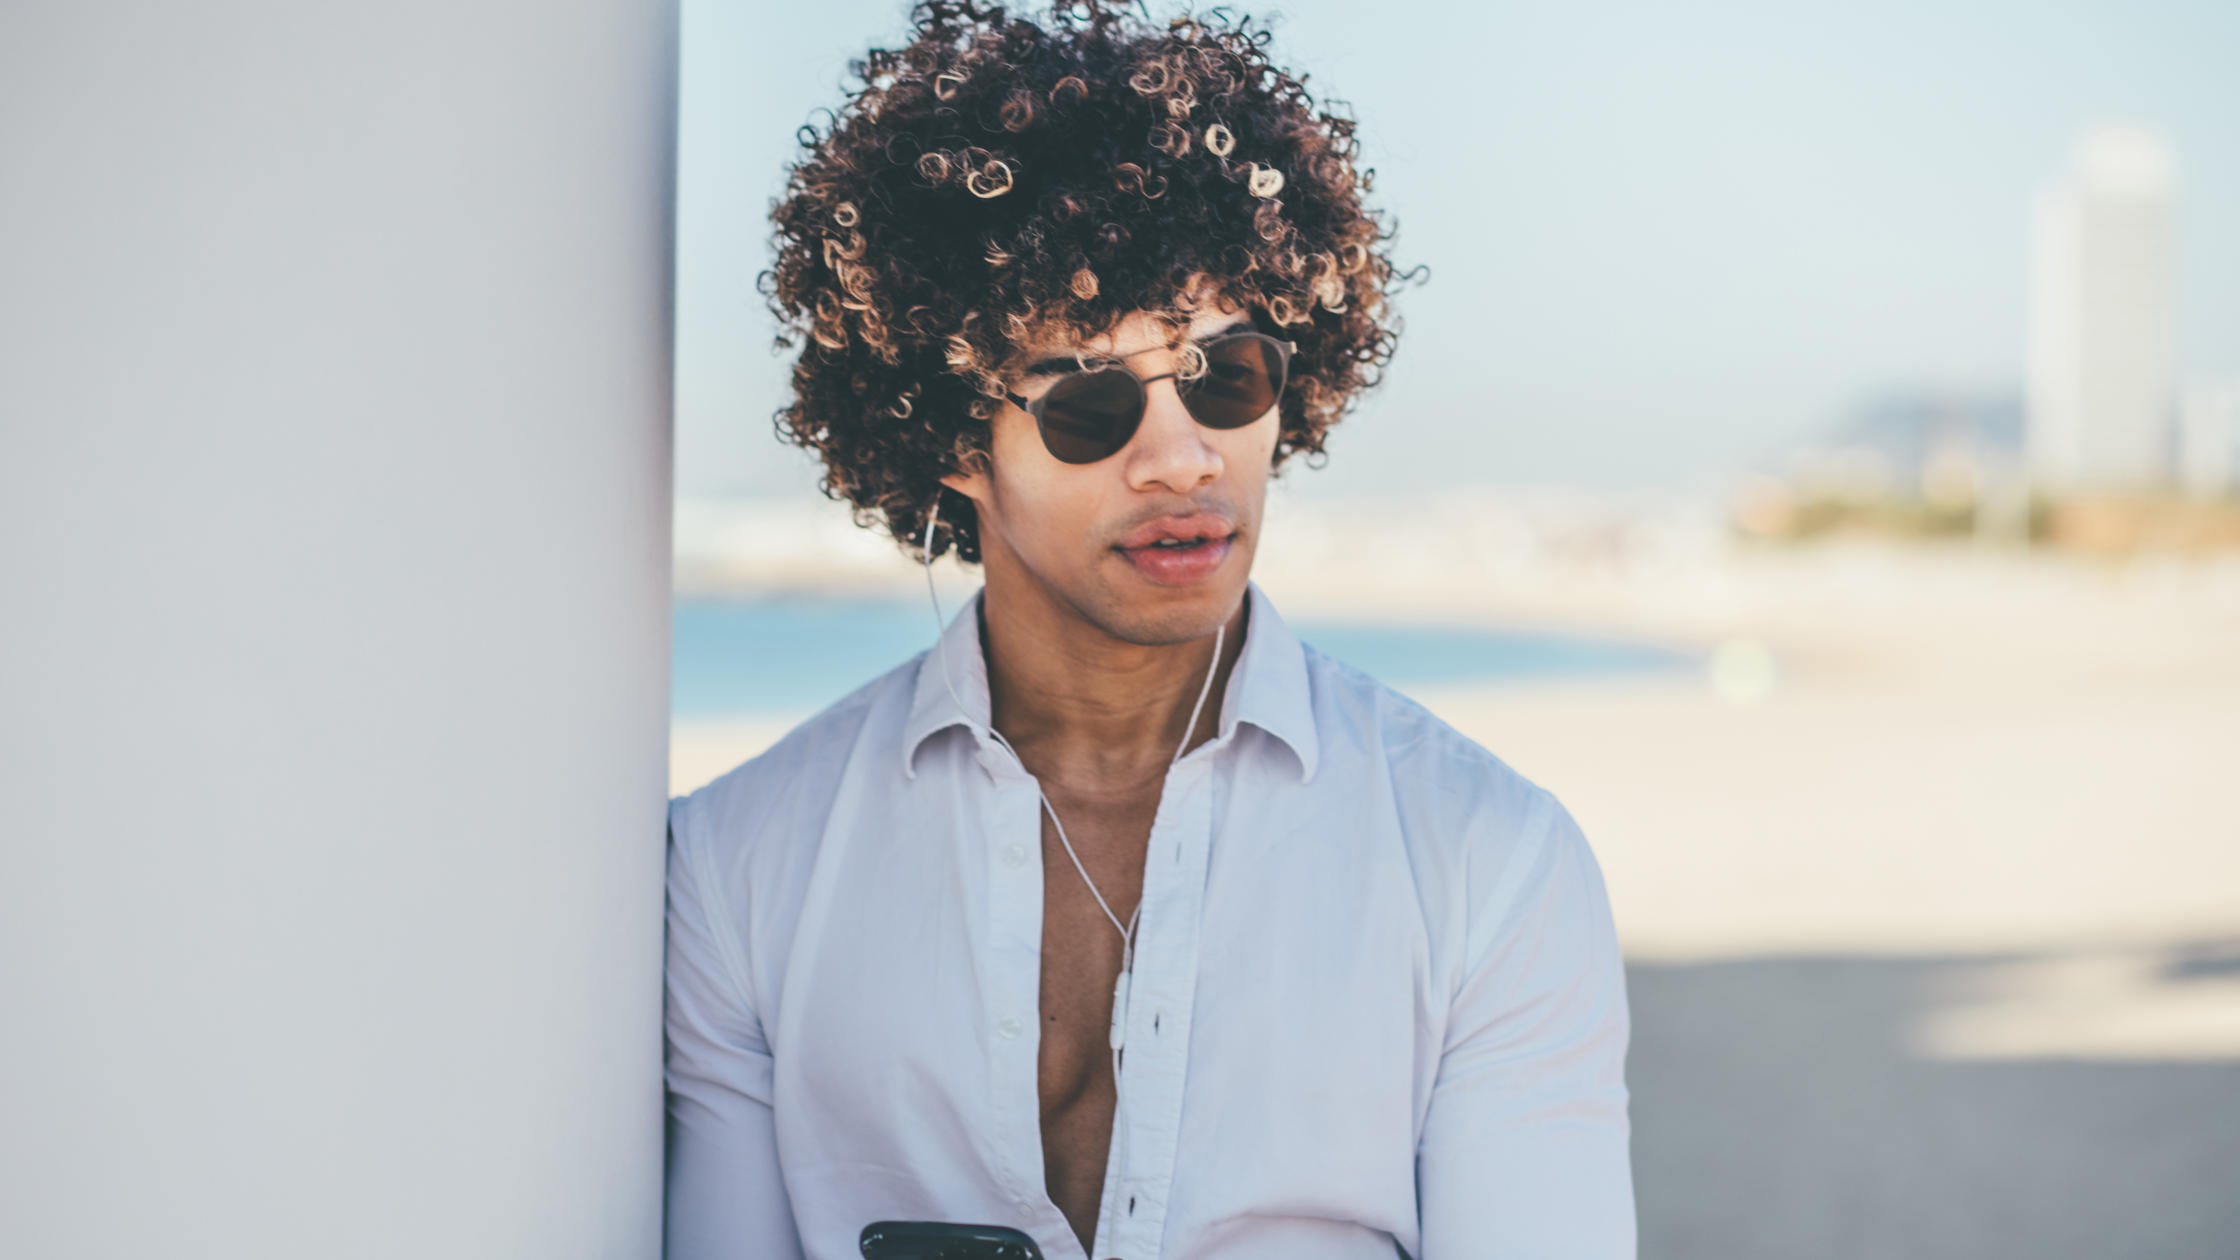 15 Best Hairstyles for Teenage Guys with Curly Hair